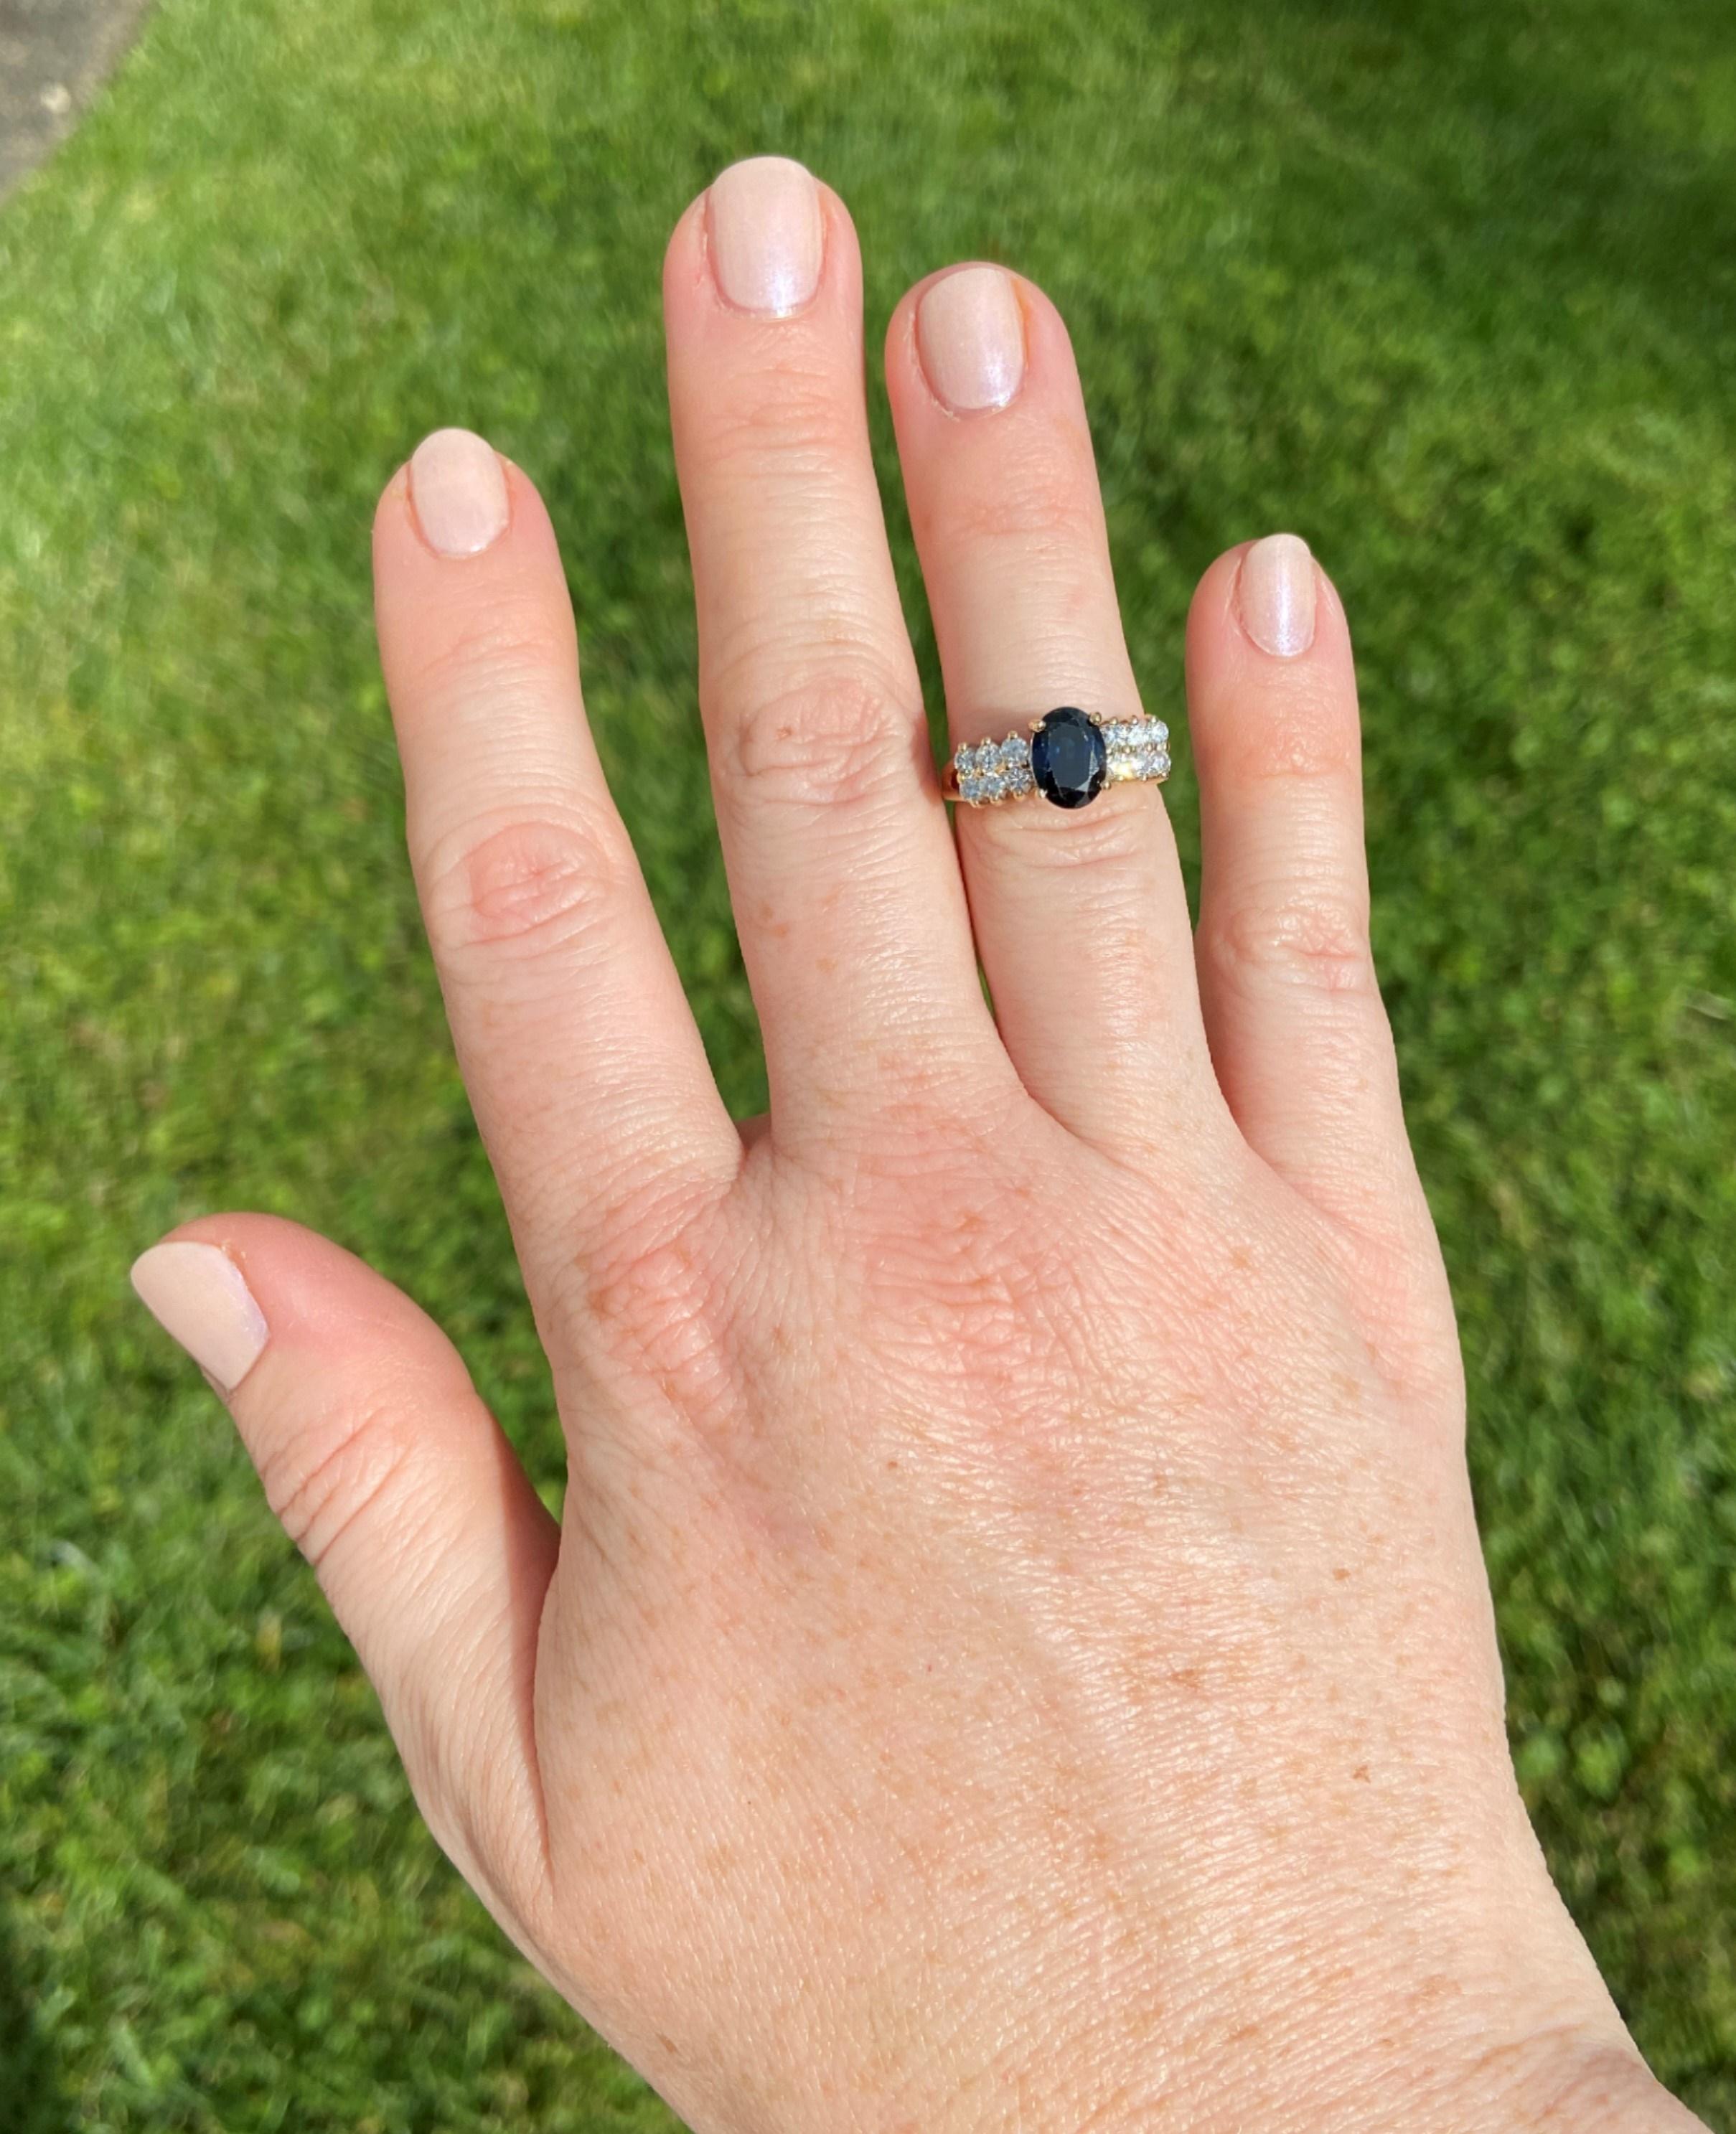 An enigmatic, deep blue 1.69ct oval sapphire sits at the pinnacle of this romantic ring. When viewed in profile, this ring reminds us of Italian footbridges over canals and romantic walks on the streets of Paris. Cobblestones of H-I color, SI2-I1